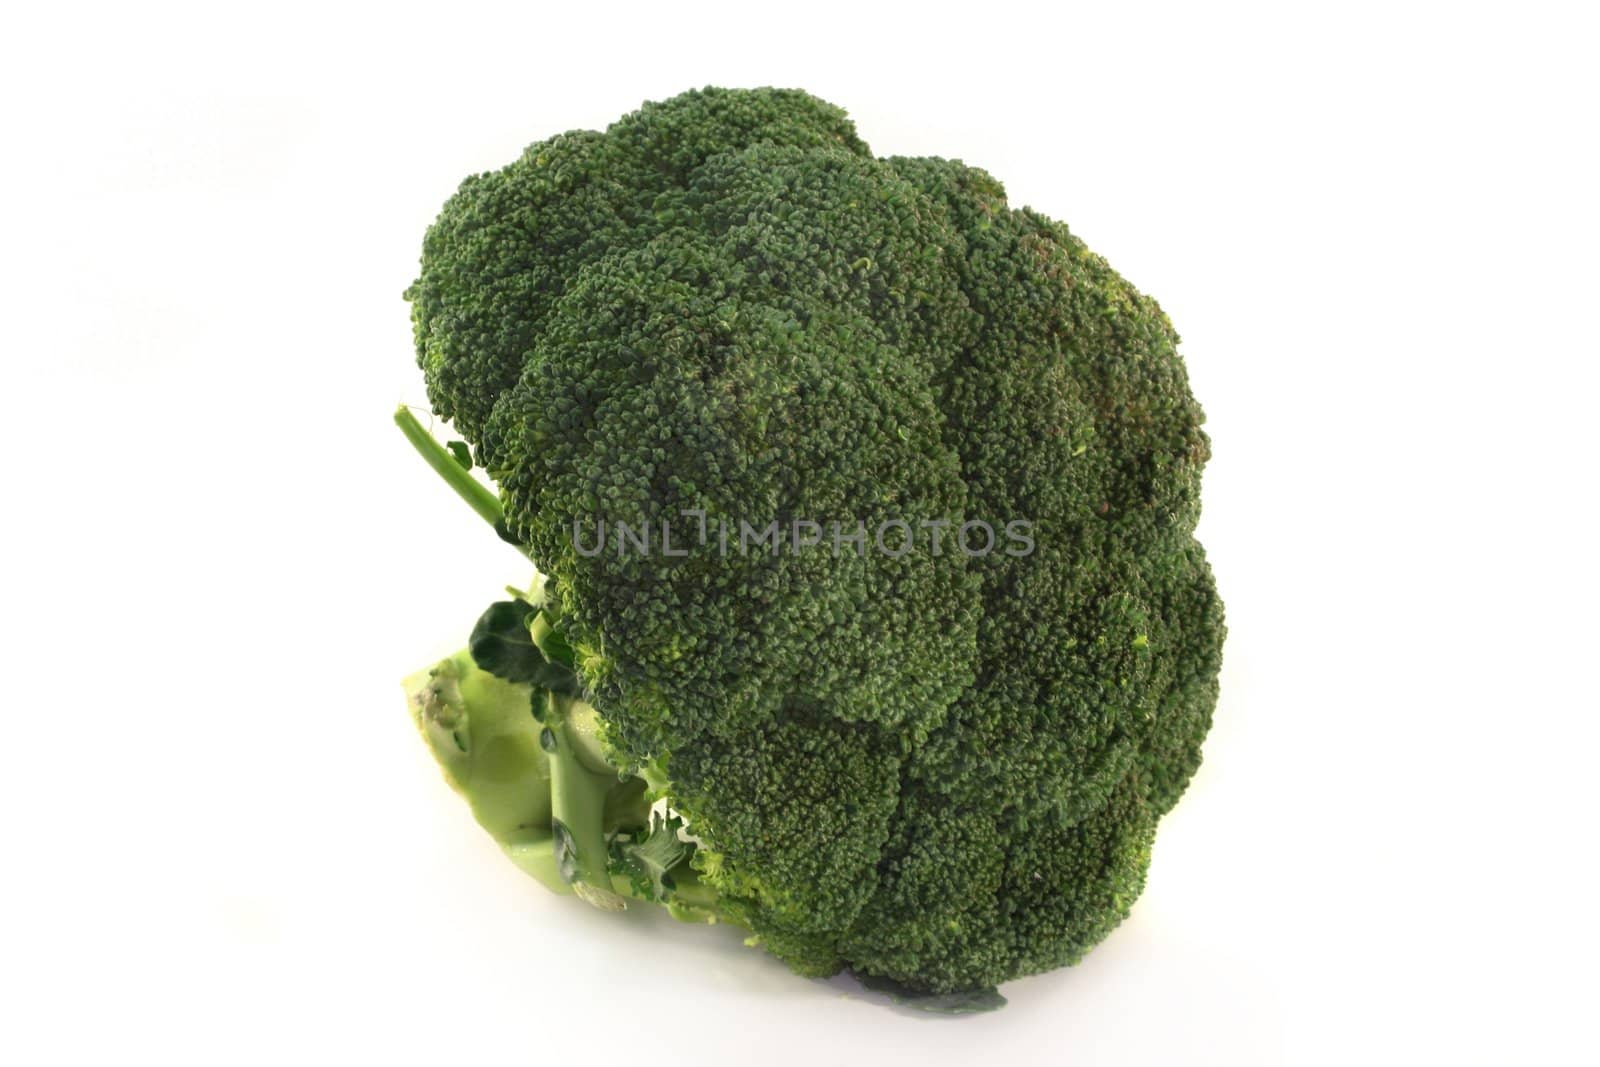 green broccoli head on a white background